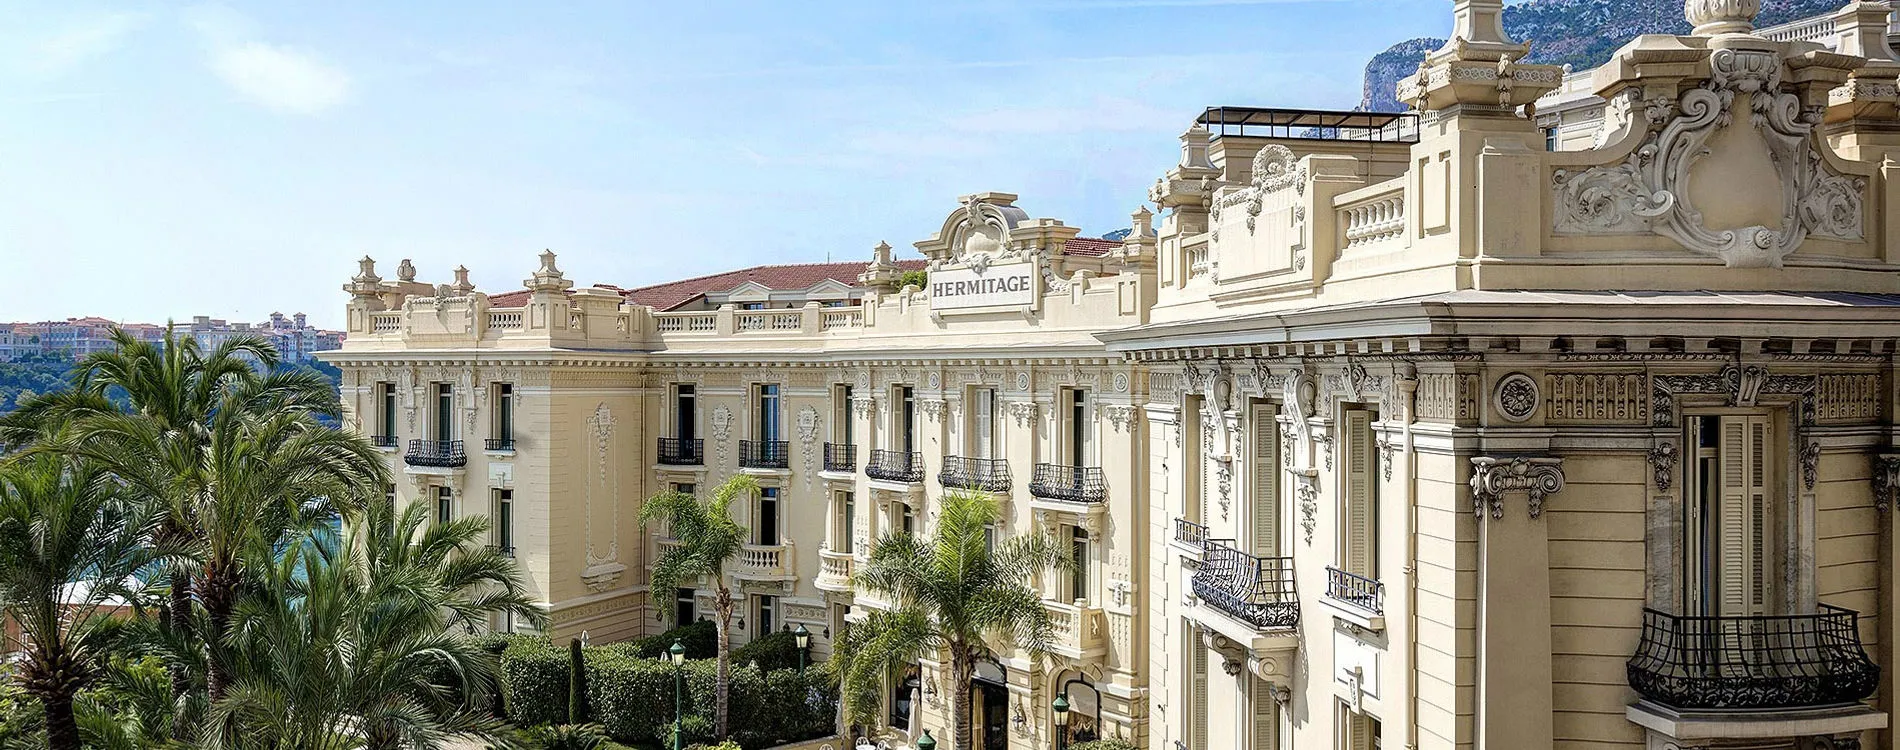 Stay at the five-star Hotel Hermitage in Monte Carlo on your F1 Grand Prix tour